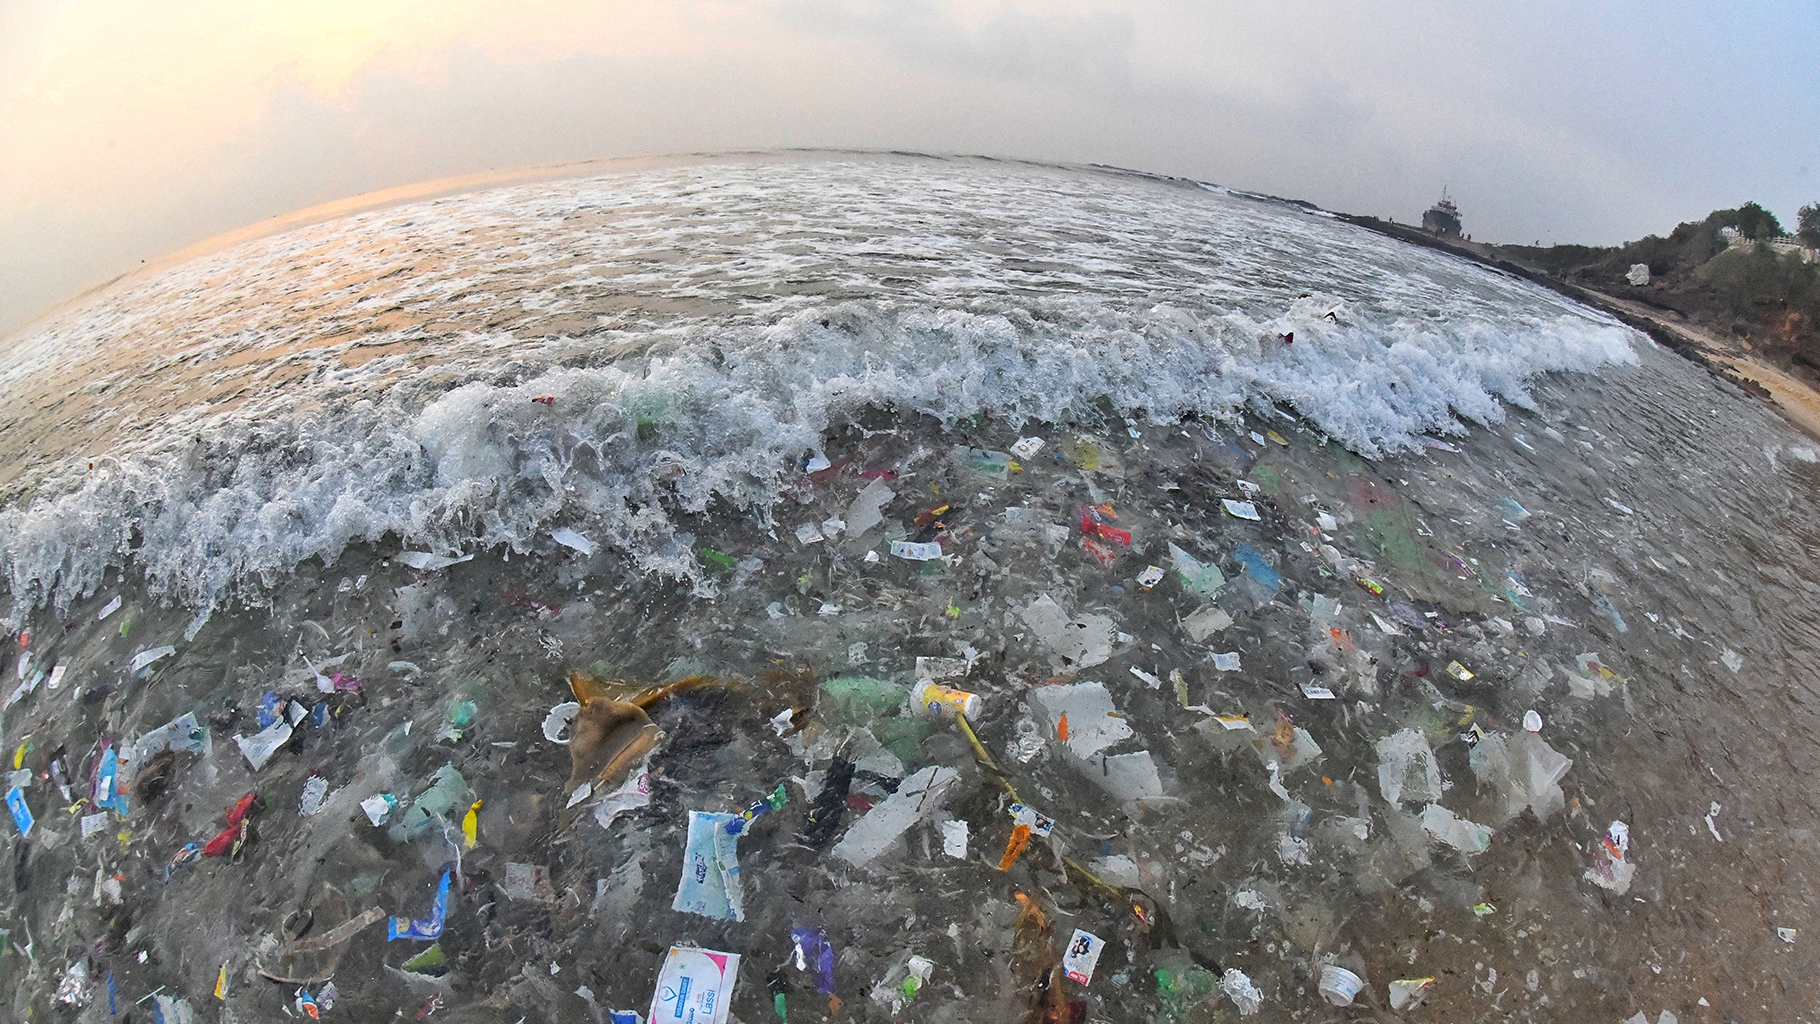 A wide angle lens shot of waves filled with trash crashing on beach.